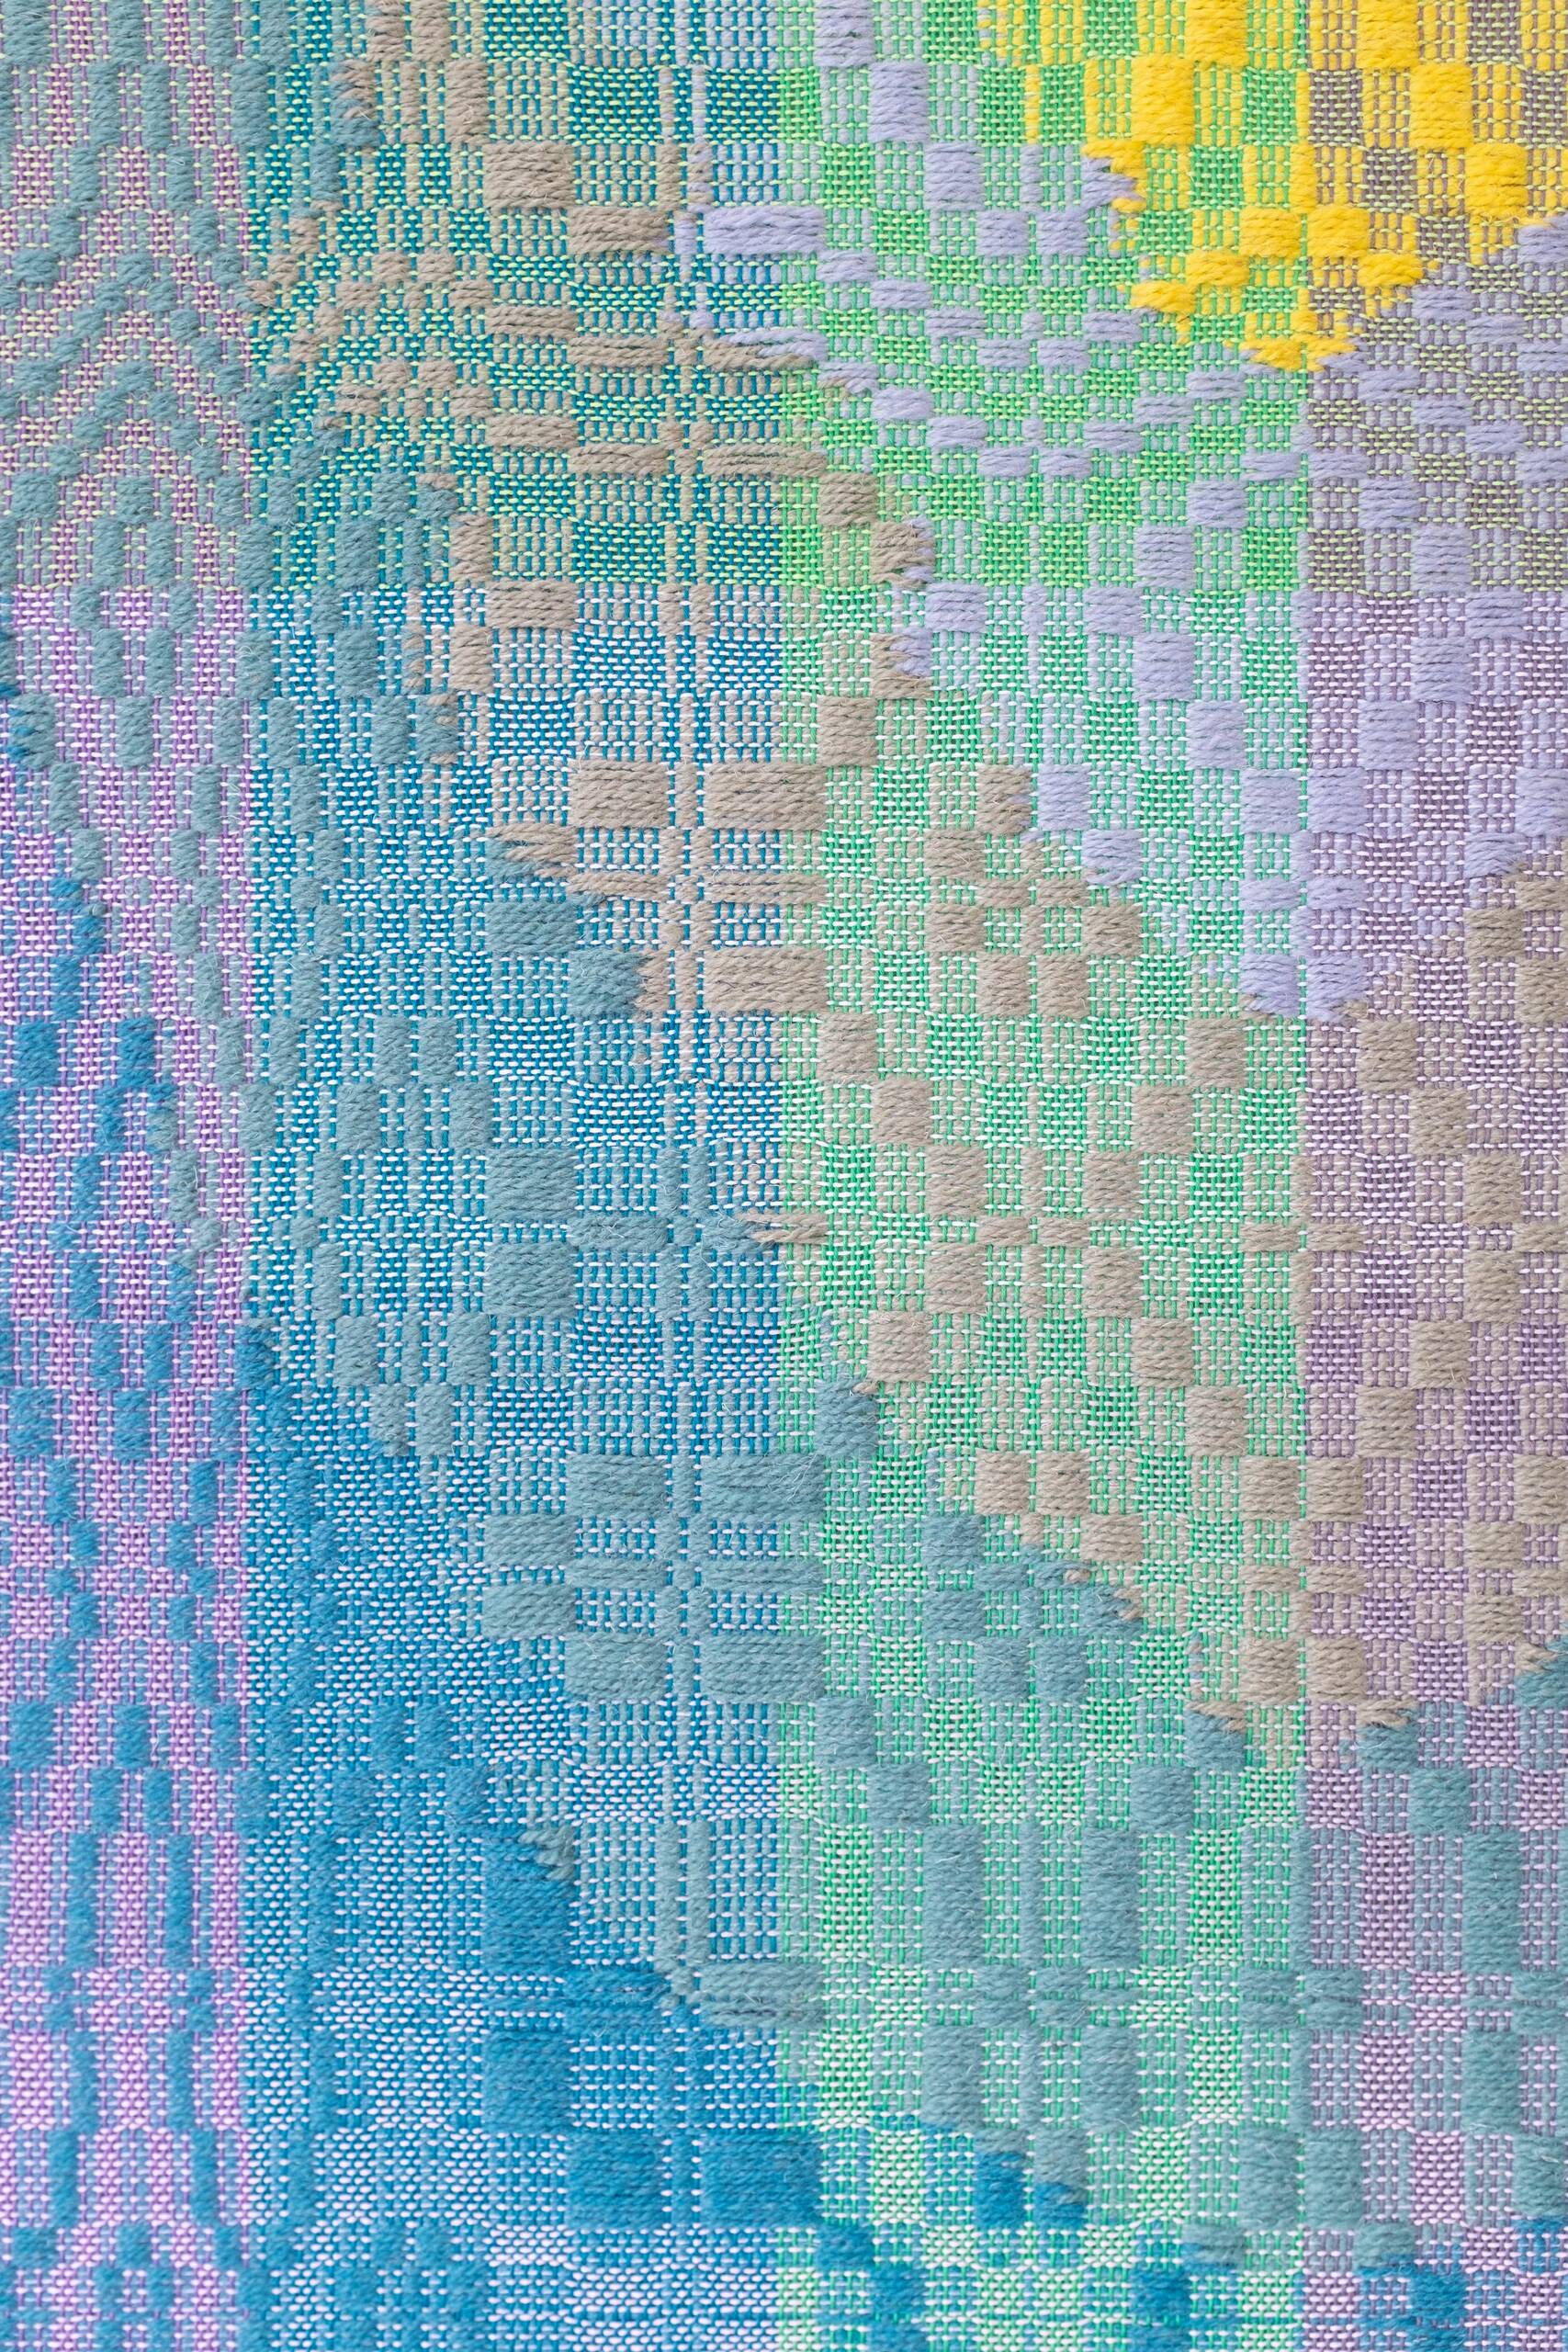 First, you don't know what you don't know [Ocean series, Sunlight Zone], Hand-woven cotton and wool yarn, 2023